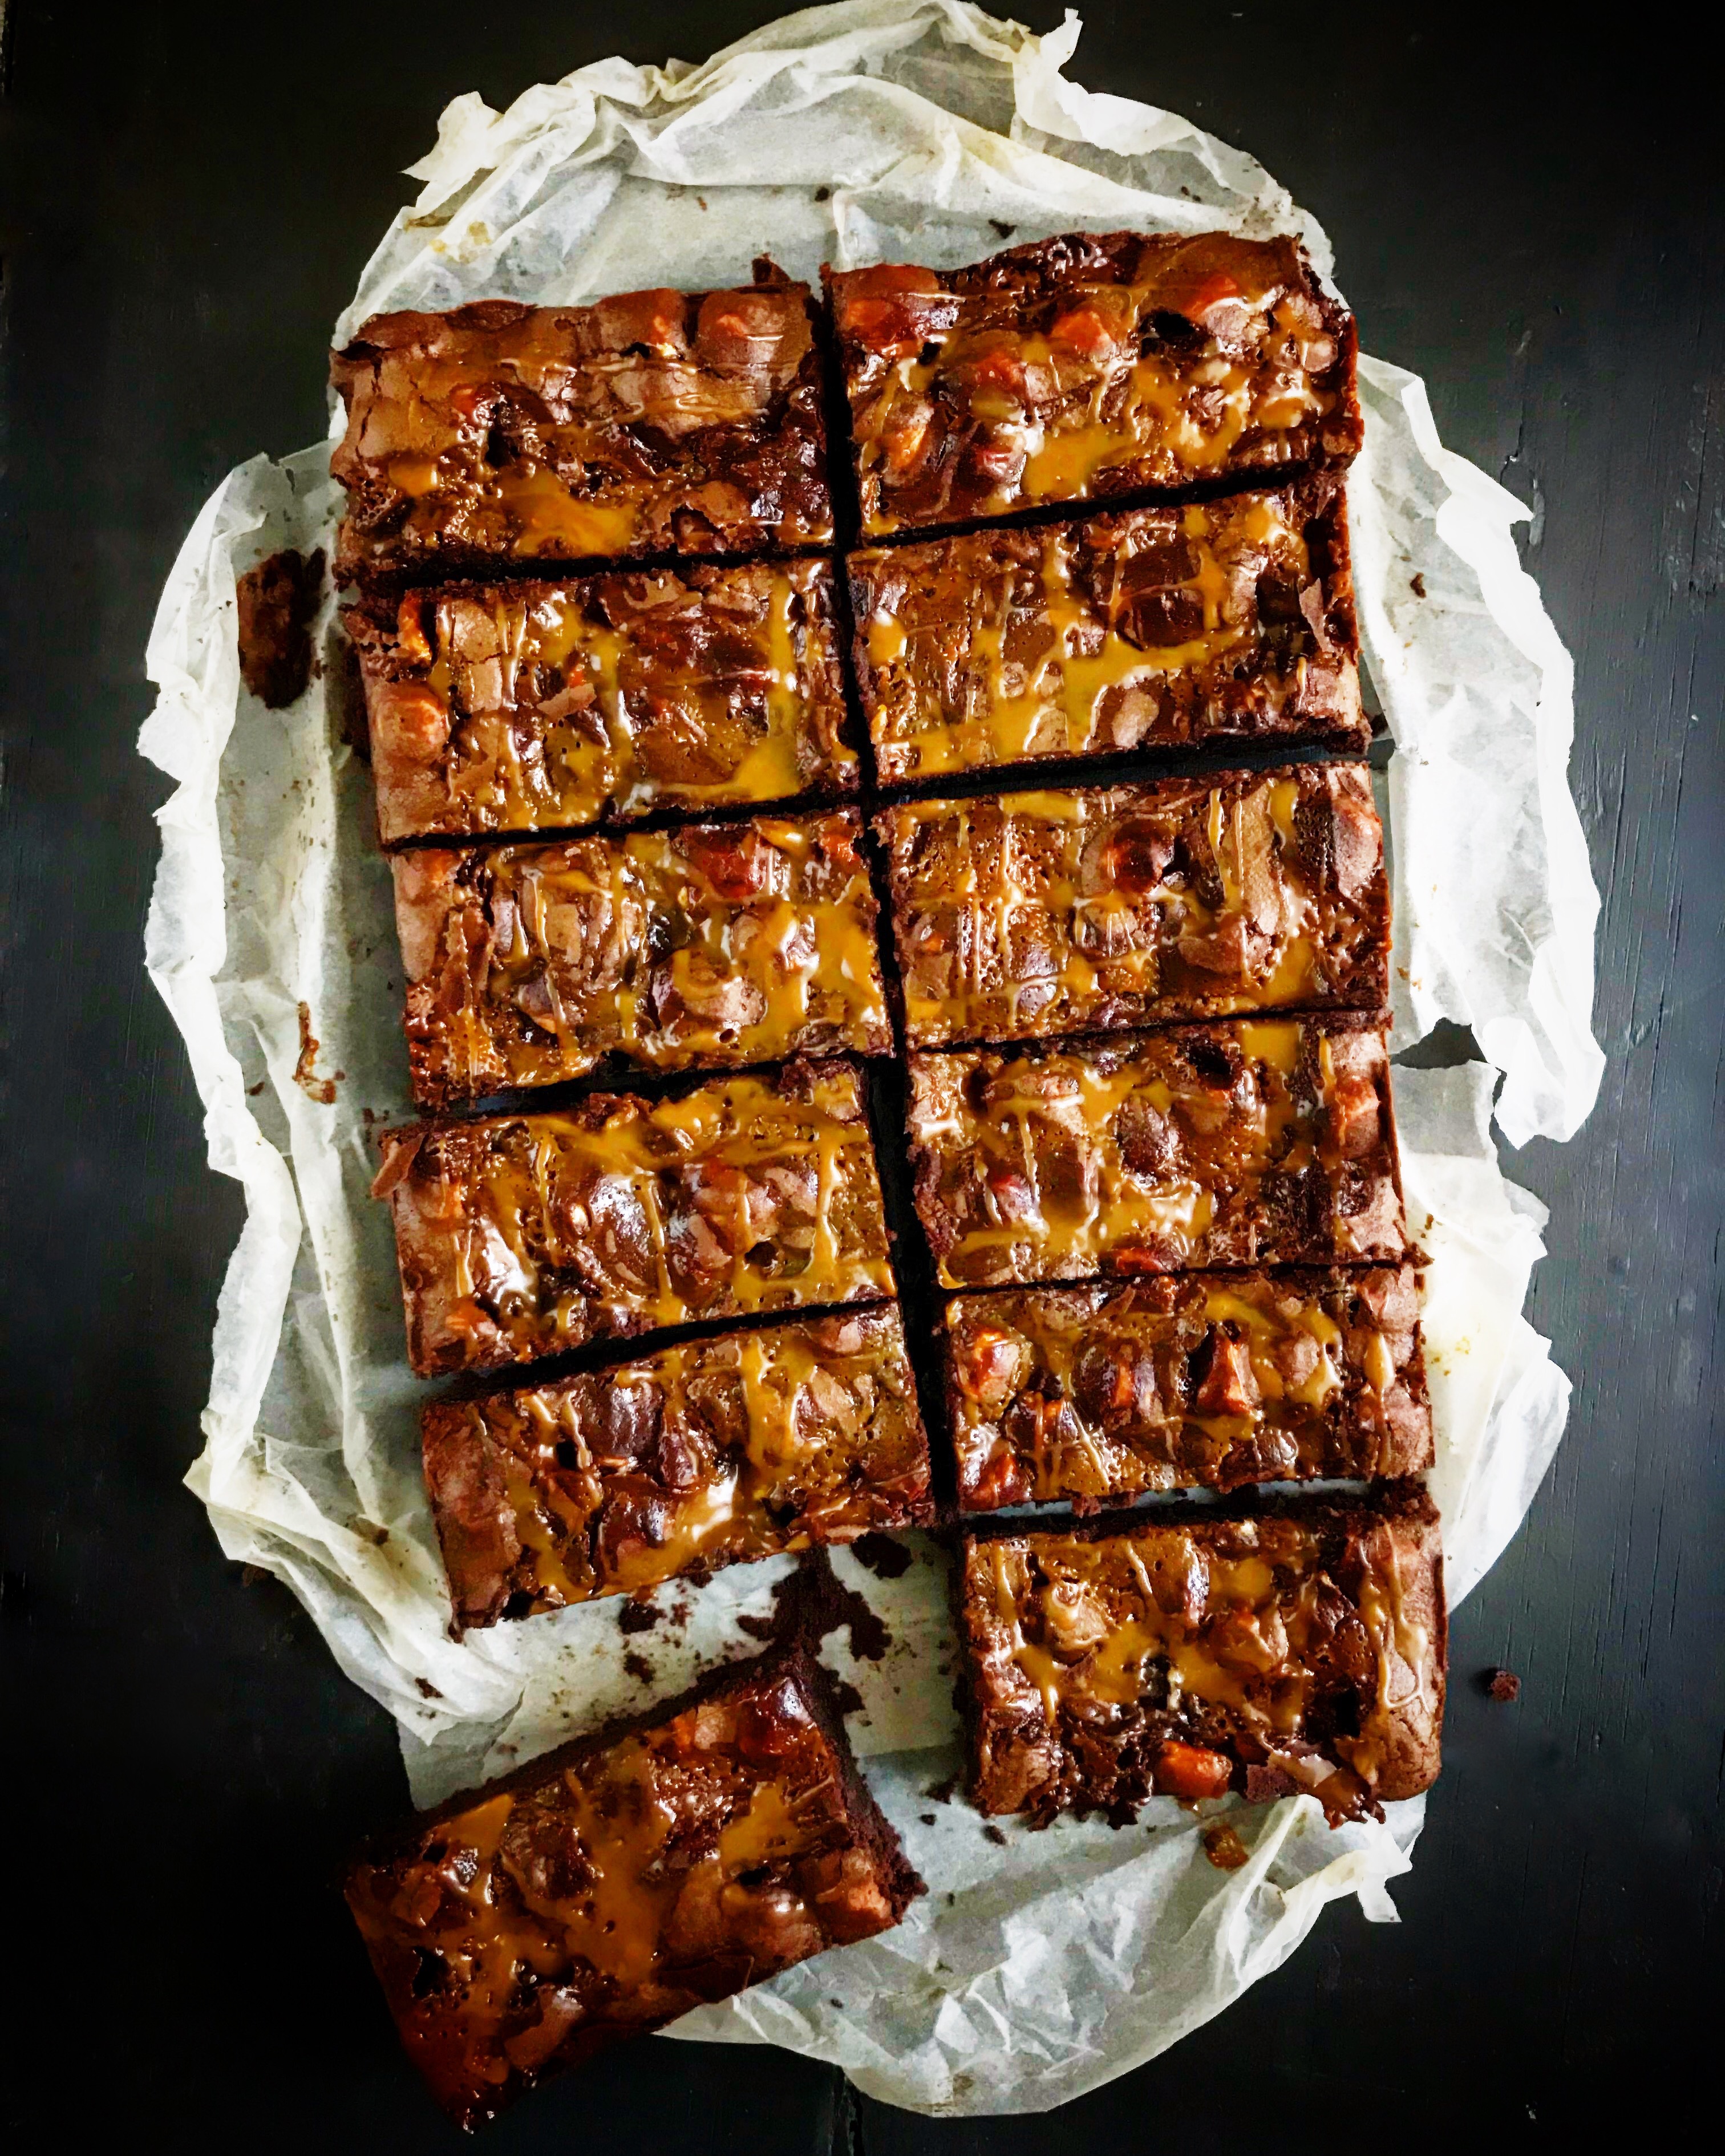 Salted Caramel and Marshmallow Brownies